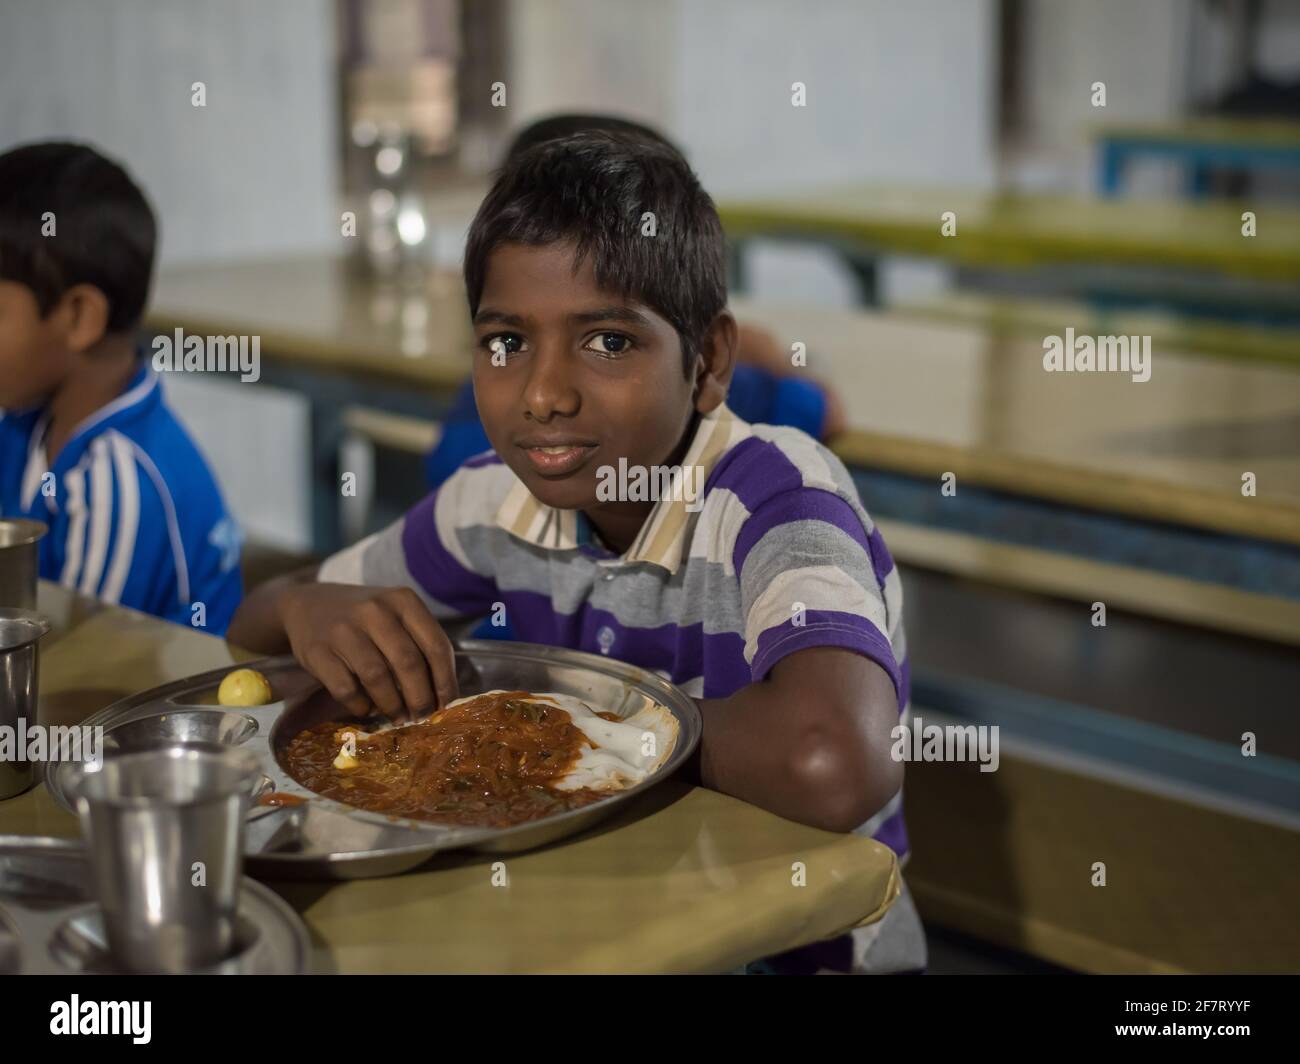 Varanasi, India. 10-14-2019. Portrait of a boy having lunch at school after the morning class finish and before the school sport activities when they Stock Photo